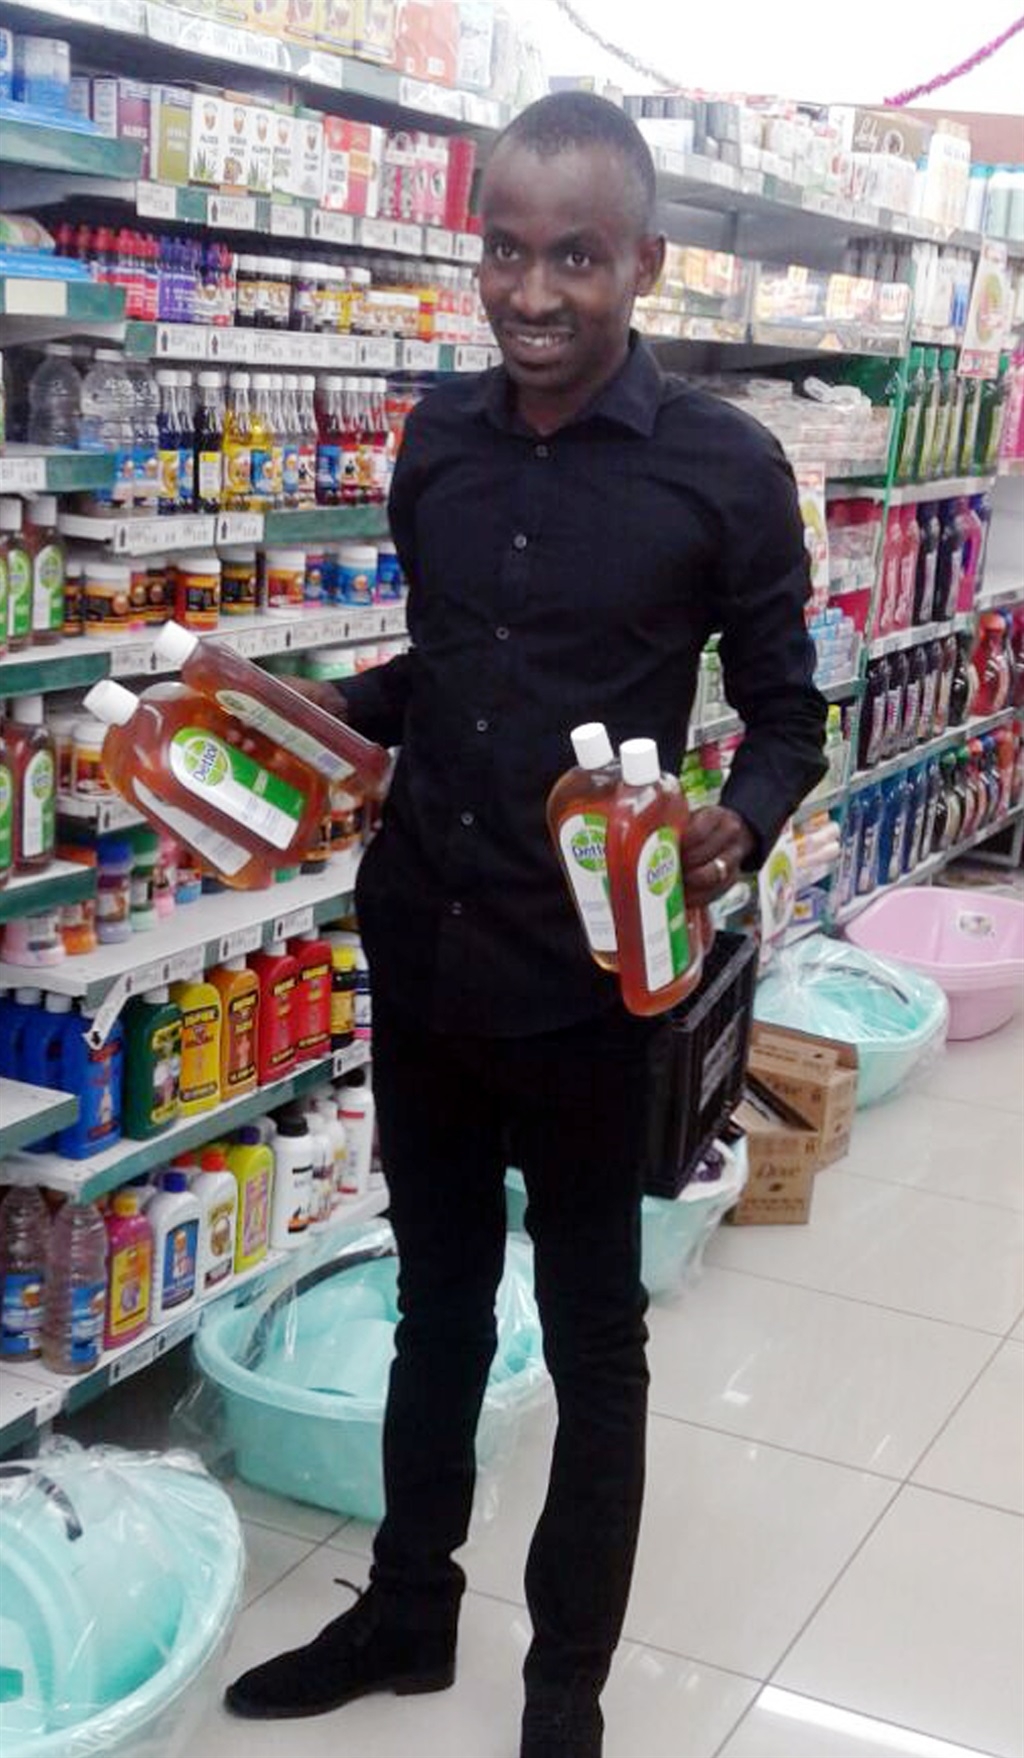 Even after Dettol said no to the use of its product for ‘cures’, Prophet Rufus Phala went to buy more for his weekend service. 